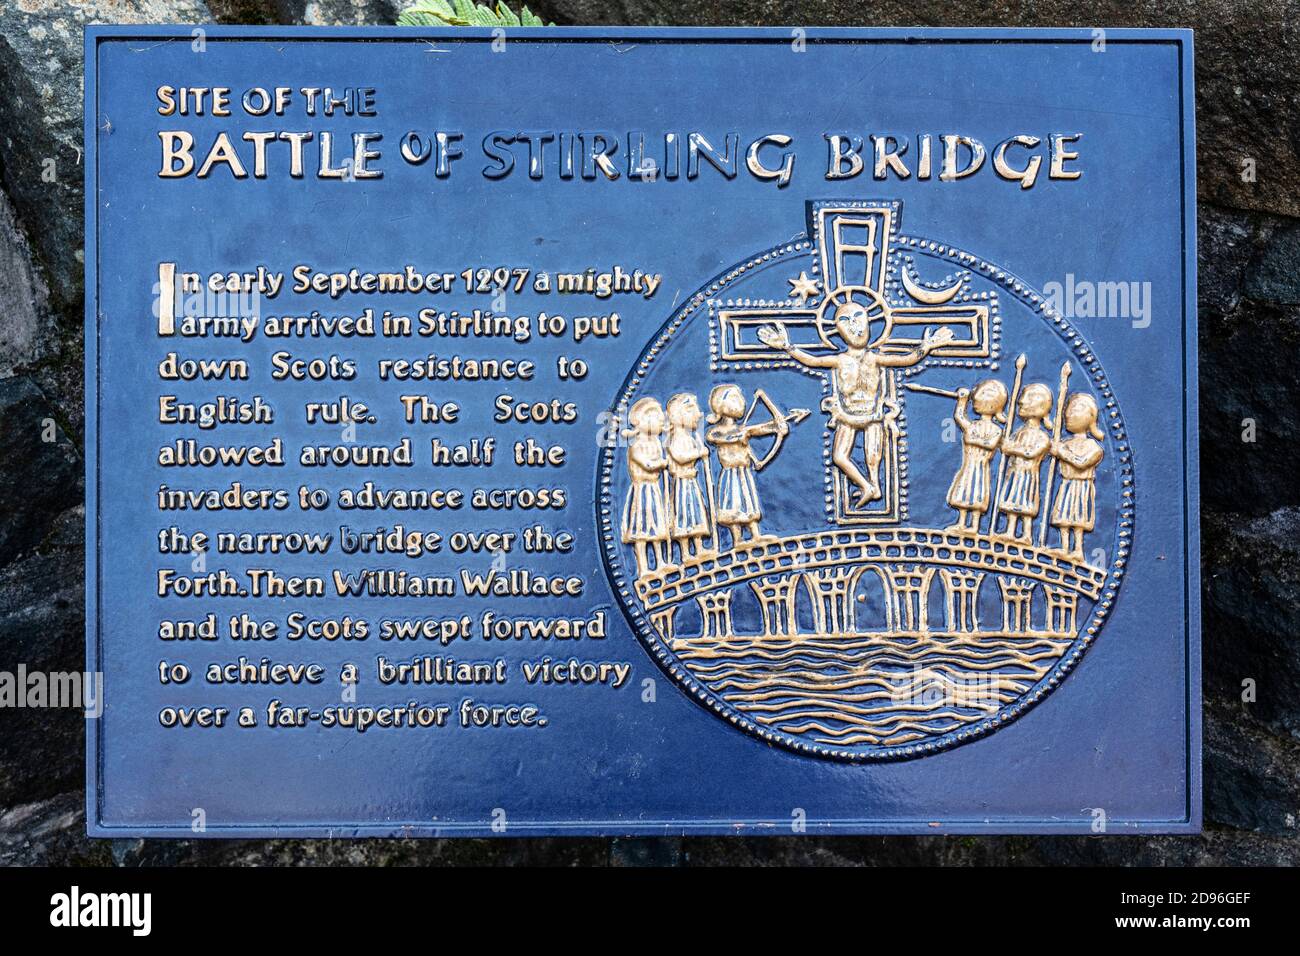 Plaque marking the site of the Battle of Stirling Bridge (1297) mounted on Old Stirling Bridge over the River Forth at Stirling, Scotland, UK Stock Photo